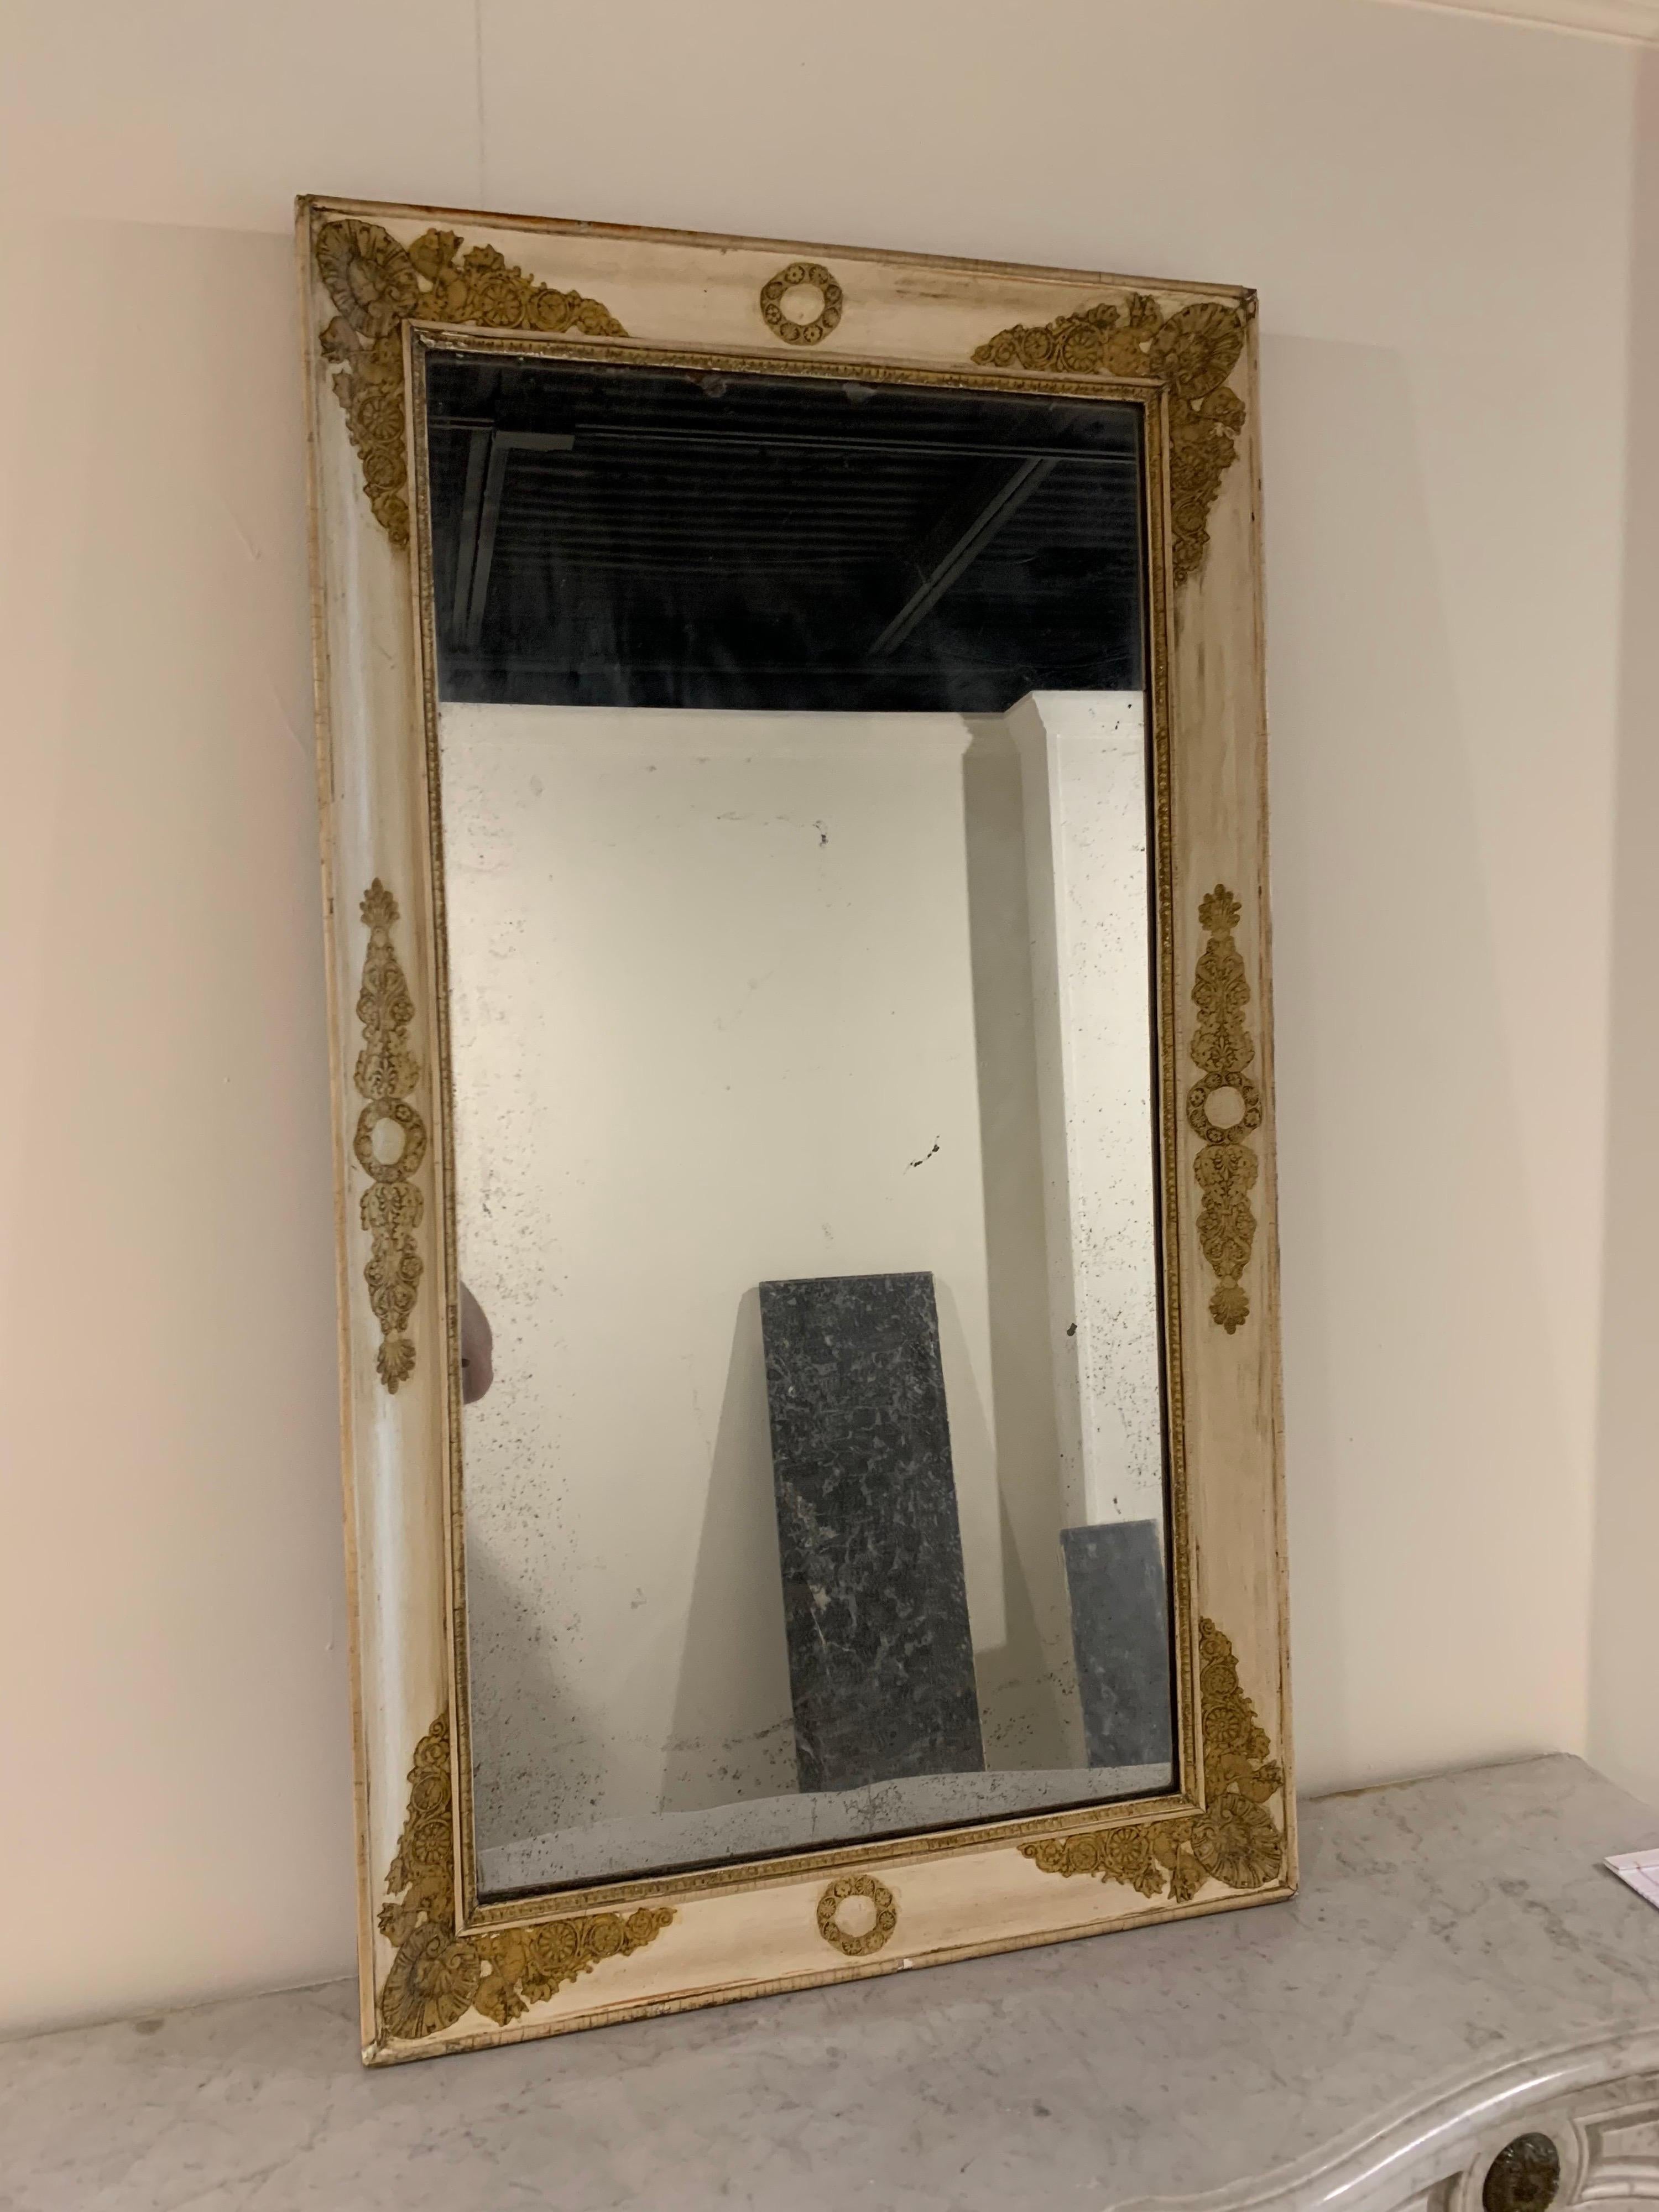 Stunning 19th century French Napoleon III Gesso mirror with original mercury glass. Beautiful decorative carved details in an antique gold color. So pretty!